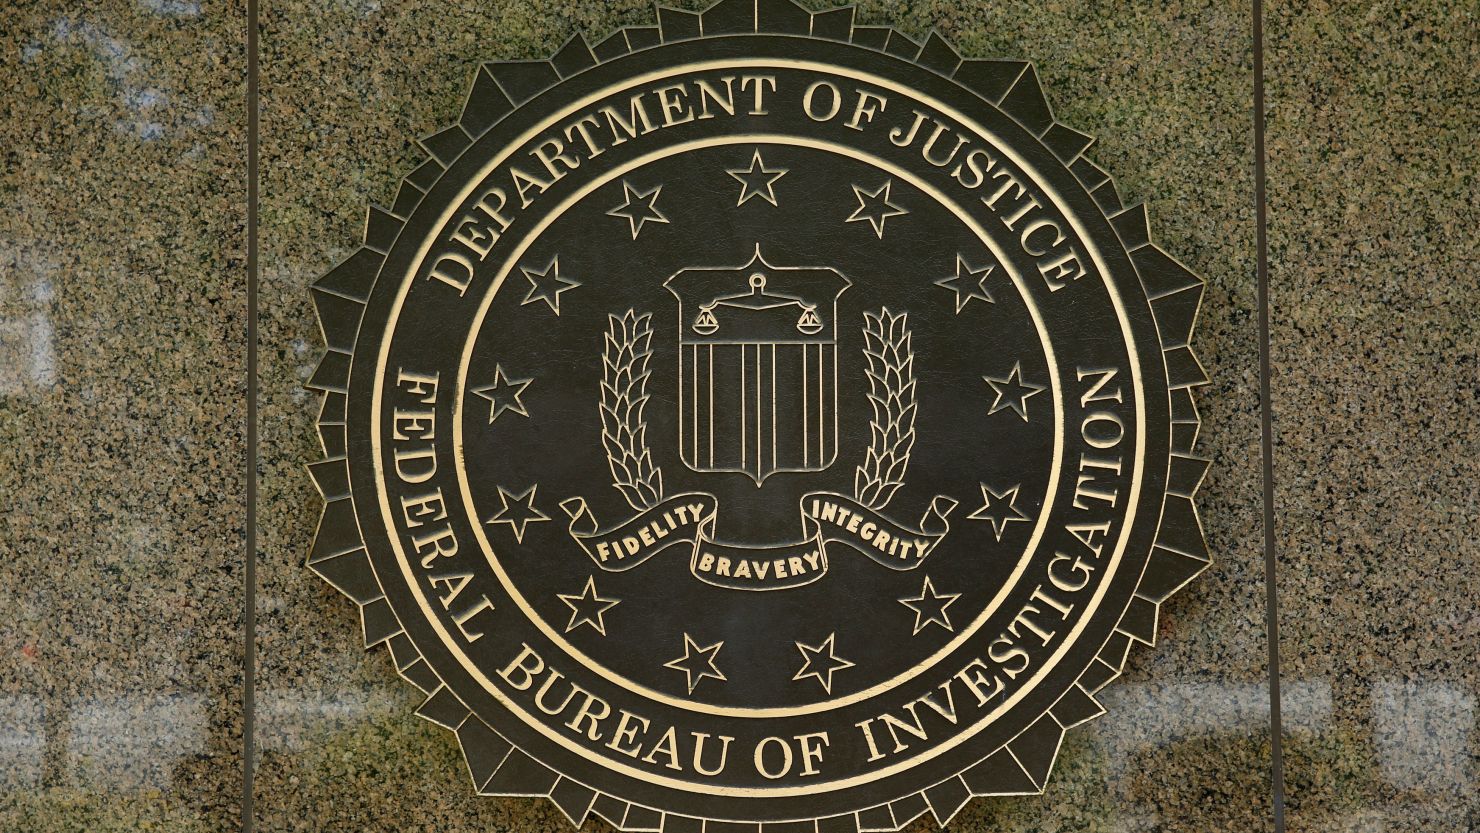 The FBI seal is seen outside the headquarters building in Washington, DC.